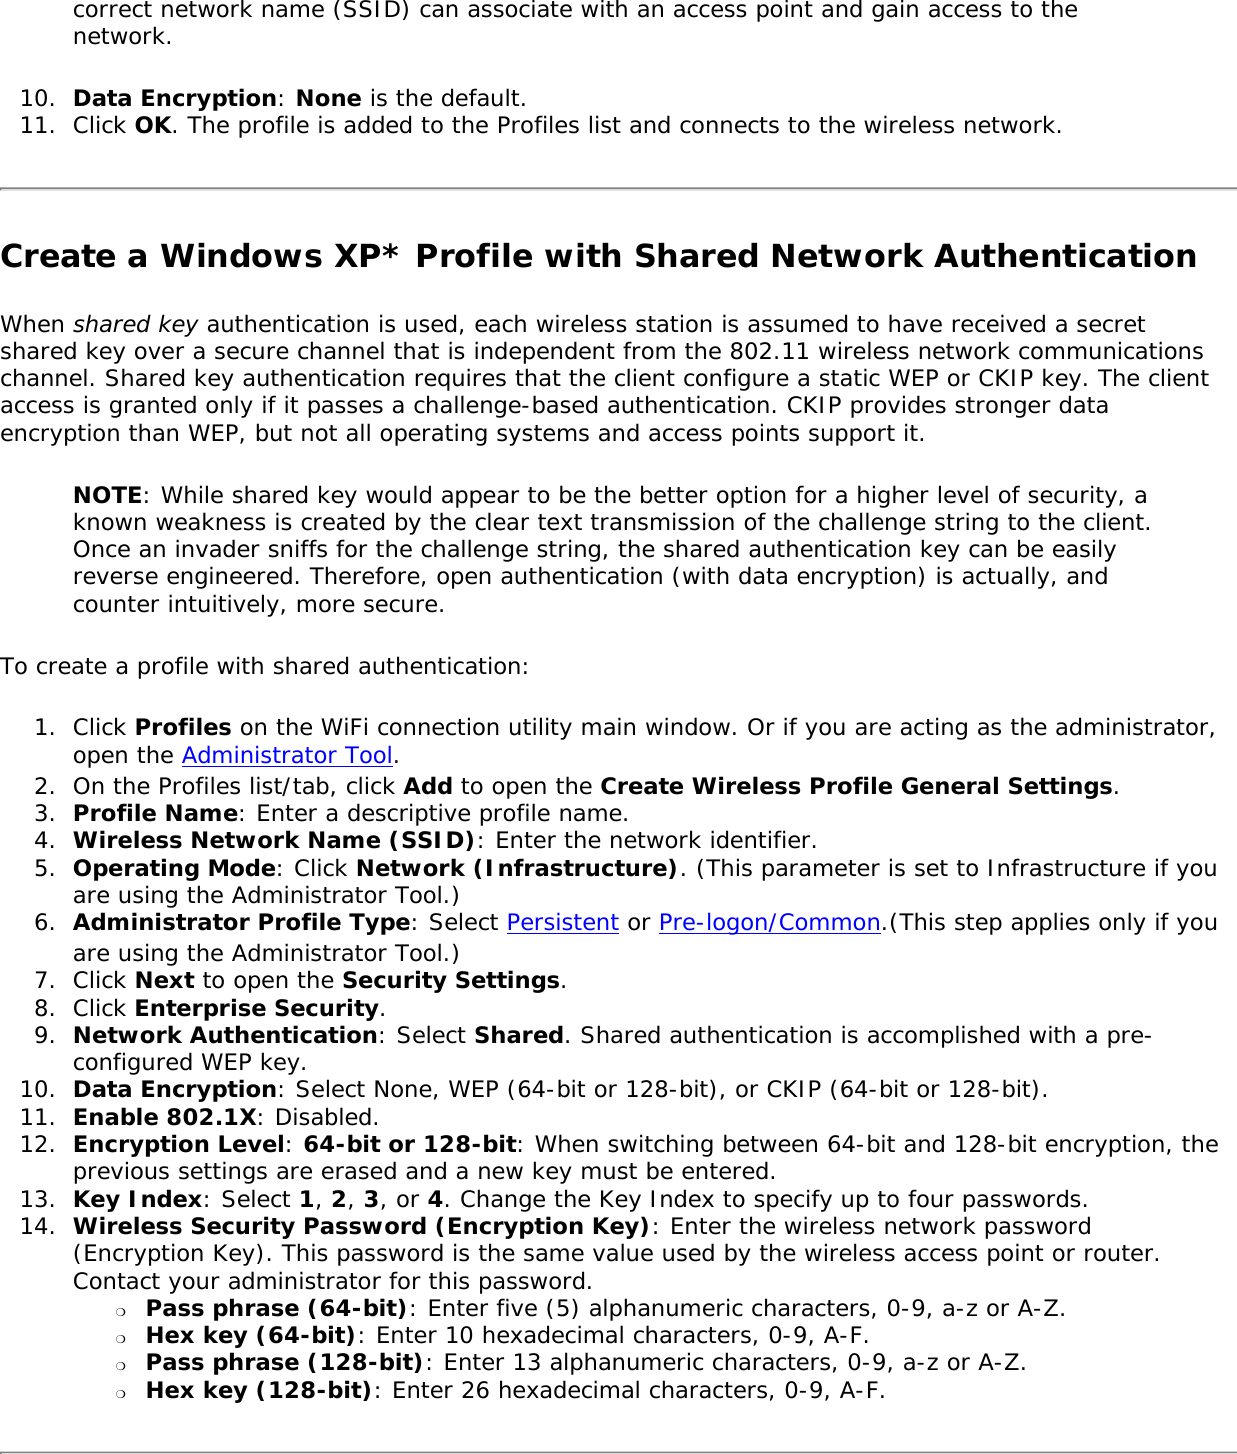 correct network name (SSID) can associate with an access point and gain access to the network.10.  Data Encryption: None is the default.11.  Click OK. The profile is added to the Profiles list and connects to the wireless network.Create a Windows XP* Profile with Shared Network AuthenticationWhen shared key authentication is used, each wireless station is assumed to have received a secret shared key over a secure channel that is independent from the 802.11 wireless network communications channel. Shared key authentication requires that the client configure a static WEP or CKIP key. The client access is granted only if it passes a challenge-based authentication. CKIP provides stronger data encryption than WEP, but not all operating systems and access points support it.NOTE: While shared key would appear to be the better option for a higher level of security, a known weakness is created by the clear text transmission of the challenge string to the client. Once an invader sniffs for the challenge string, the shared authentication key can be easily reverse engineered. Therefore, open authentication (with data encryption) is actually, and counter intuitively, more secure.To create a profile with shared authentication:1.  Click Profiles on the WiFi connection utility main window. Or if you are acting as the administrator, open the Administrator Tool. 2.  On the Profiles list/tab, click Add to open the Create Wireless Profile General Settings.3.  Profile Name: Enter a descriptive profile name.4.  Wireless Network Name (SSID): Enter the network identifier.5.  Operating Mode: Click Network (Infrastructure). (This parameter is set to Infrastructure if you are using the Administrator Tool.)6.  Administrator Profile Type: Select Persistent or Pre-logon/Common.(This step applies only if you are using the Administrator Tool.)7.  Click Next to open the Security Settings.8.  Click Enterprise Security.9.  Network Authentication: Select Shared. Shared authentication is accomplished with a pre-configured WEP key.10.  Data Encryption: Select None, WEP (64-bit or 128-bit), or CKIP (64-bit or 128-bit).11.  Enable 802.1X: Disabled.12.  Encryption Level: 64-bit or 128-bit: When switching between 64-bit and 128-bit encryption, the previous settings are erased and a new key must be entered. 13.  Key Index: Select 1, 2, 3, or 4. Change the Key Index to specify up to four passwords.14.  Wireless Security Password (Encryption Key): Enter the wireless network password (Encryption Key). This password is the same value used by the wireless access point or router. Contact your administrator for this password. ❍     Pass phrase (64-bit): Enter five (5) alphanumeric characters, 0-9, a-z or A-Z.❍     Hex key (64-bit): Enter 10 hexadecimal characters, 0-9, A-F.❍     Pass phrase (128-bit): Enter 13 alphanumeric characters, 0-9, a-z or A-Z. ❍     Hex key (128-bit): Enter 26 hexadecimal characters, 0-9, A-F.